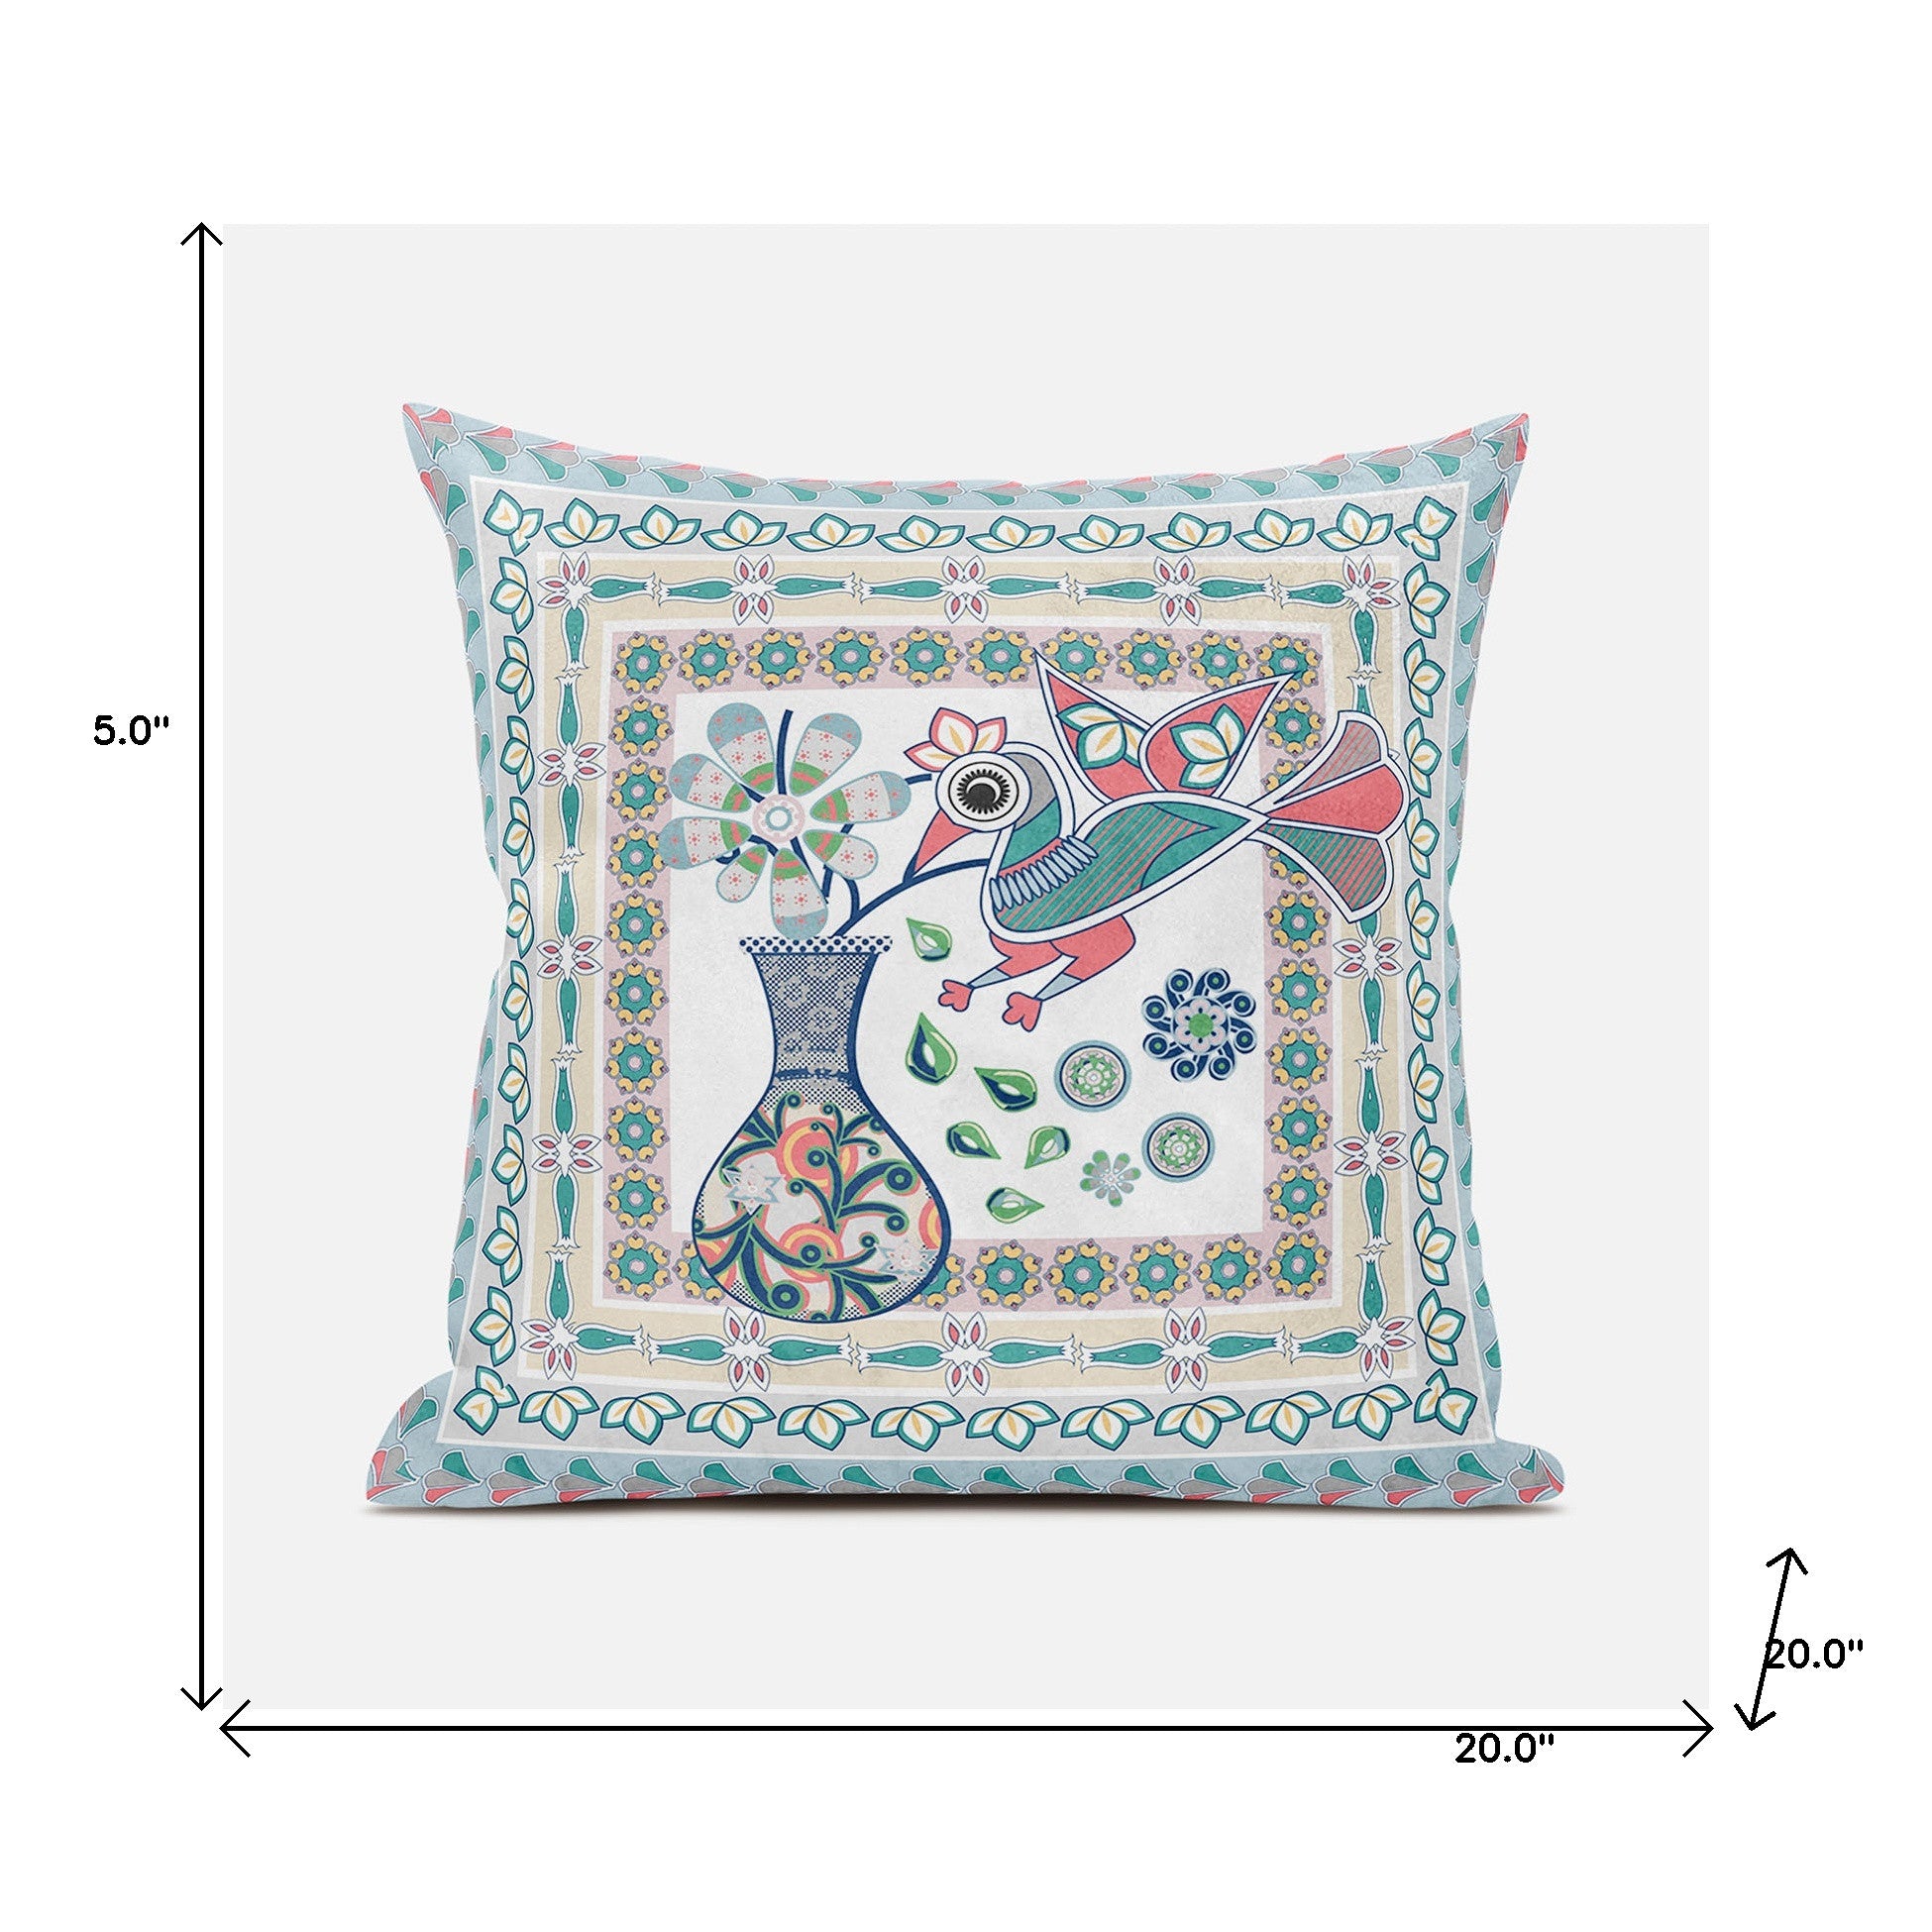 20" X 20" Pink and White Peacock Broadcloth Floral Zippered Pillow